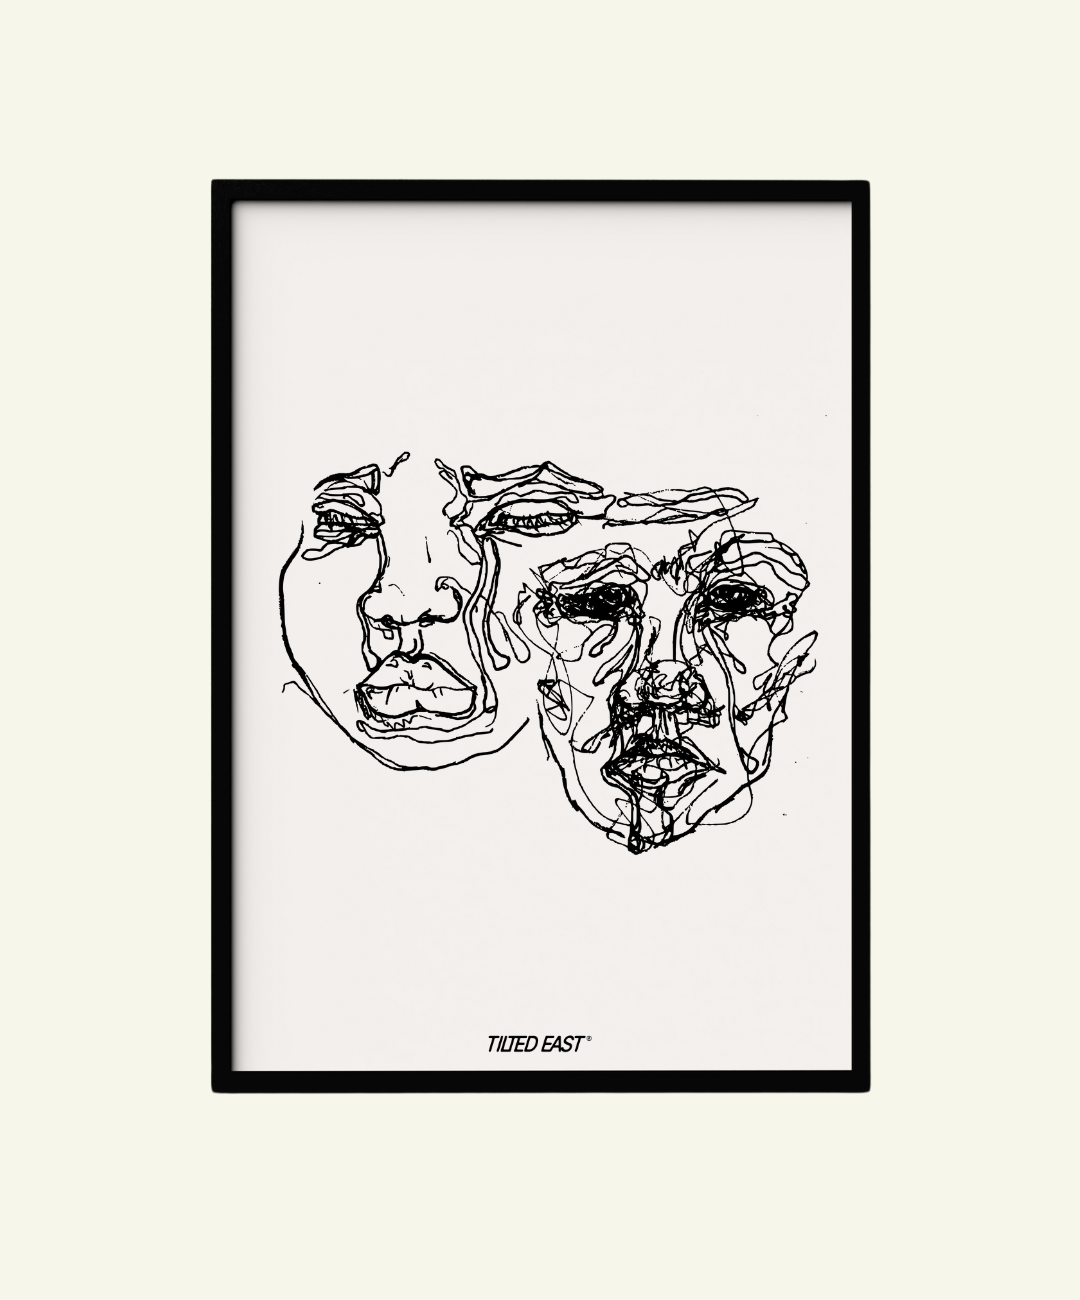 2 Personalities, Two Faces? Art Print